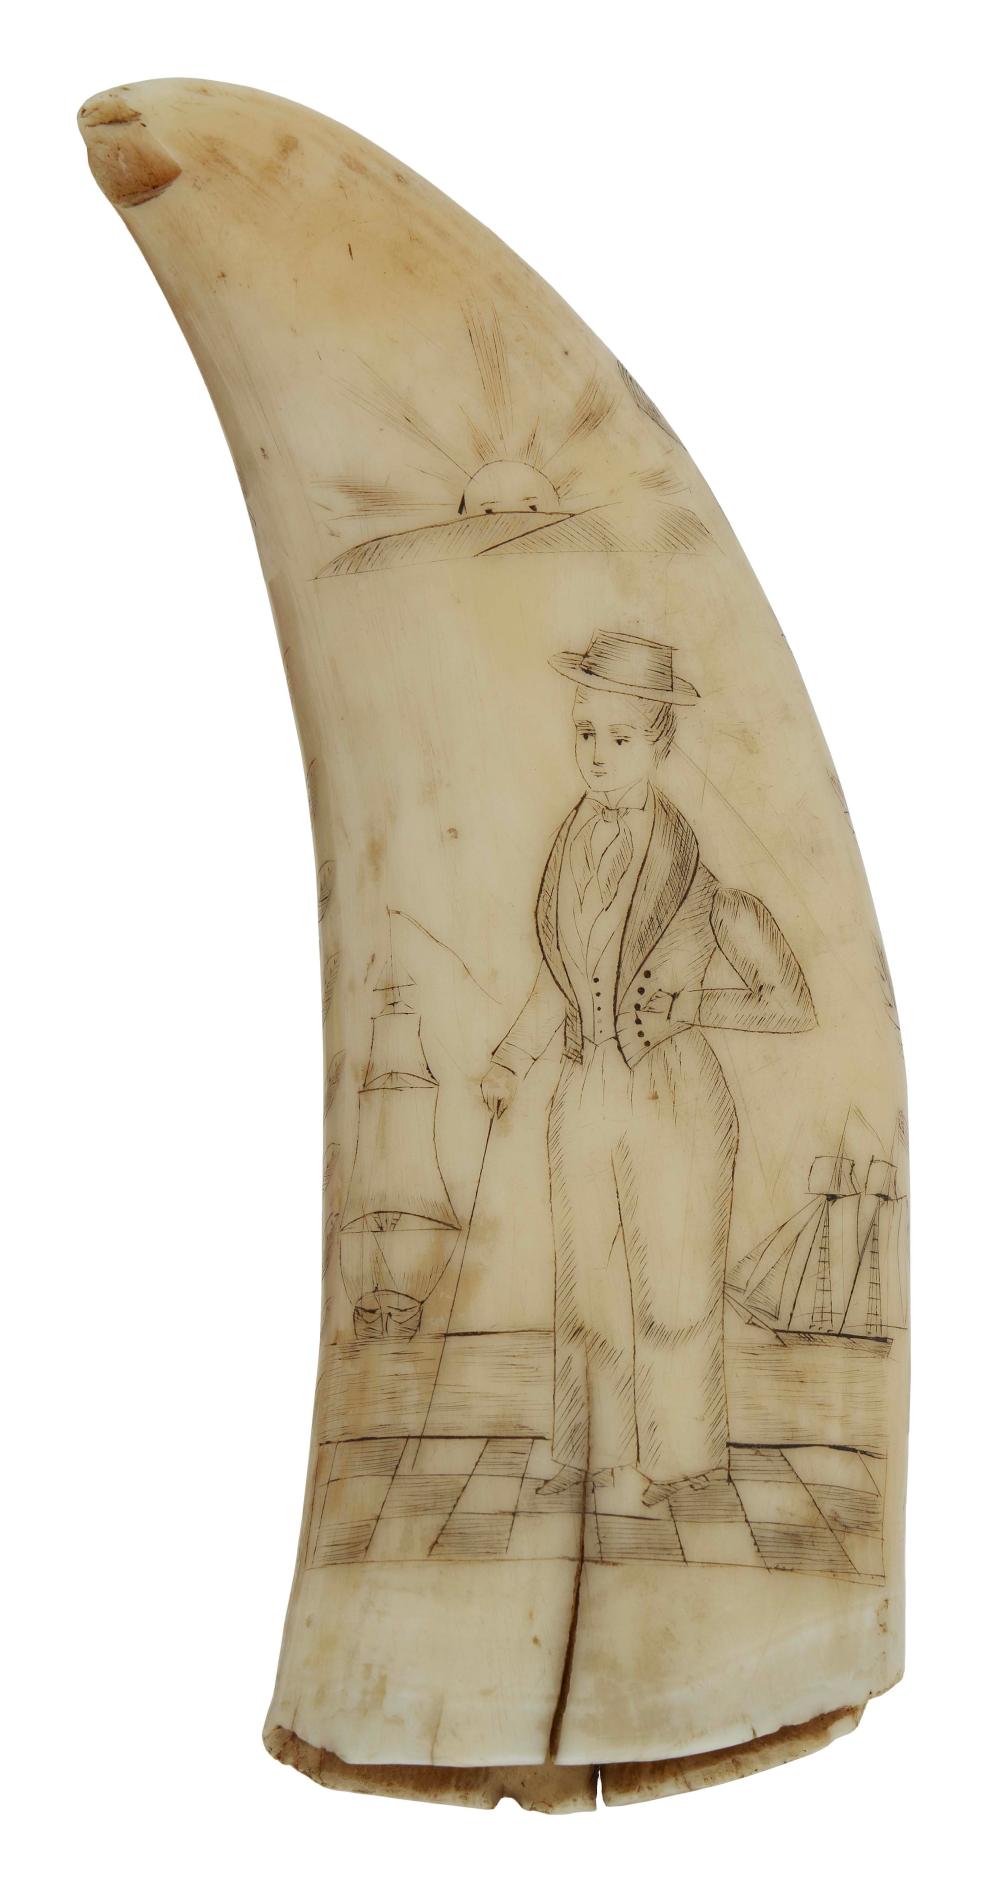 SCRIMSHAW WHALE S TOOTH WITH FIGURAL 2f128f